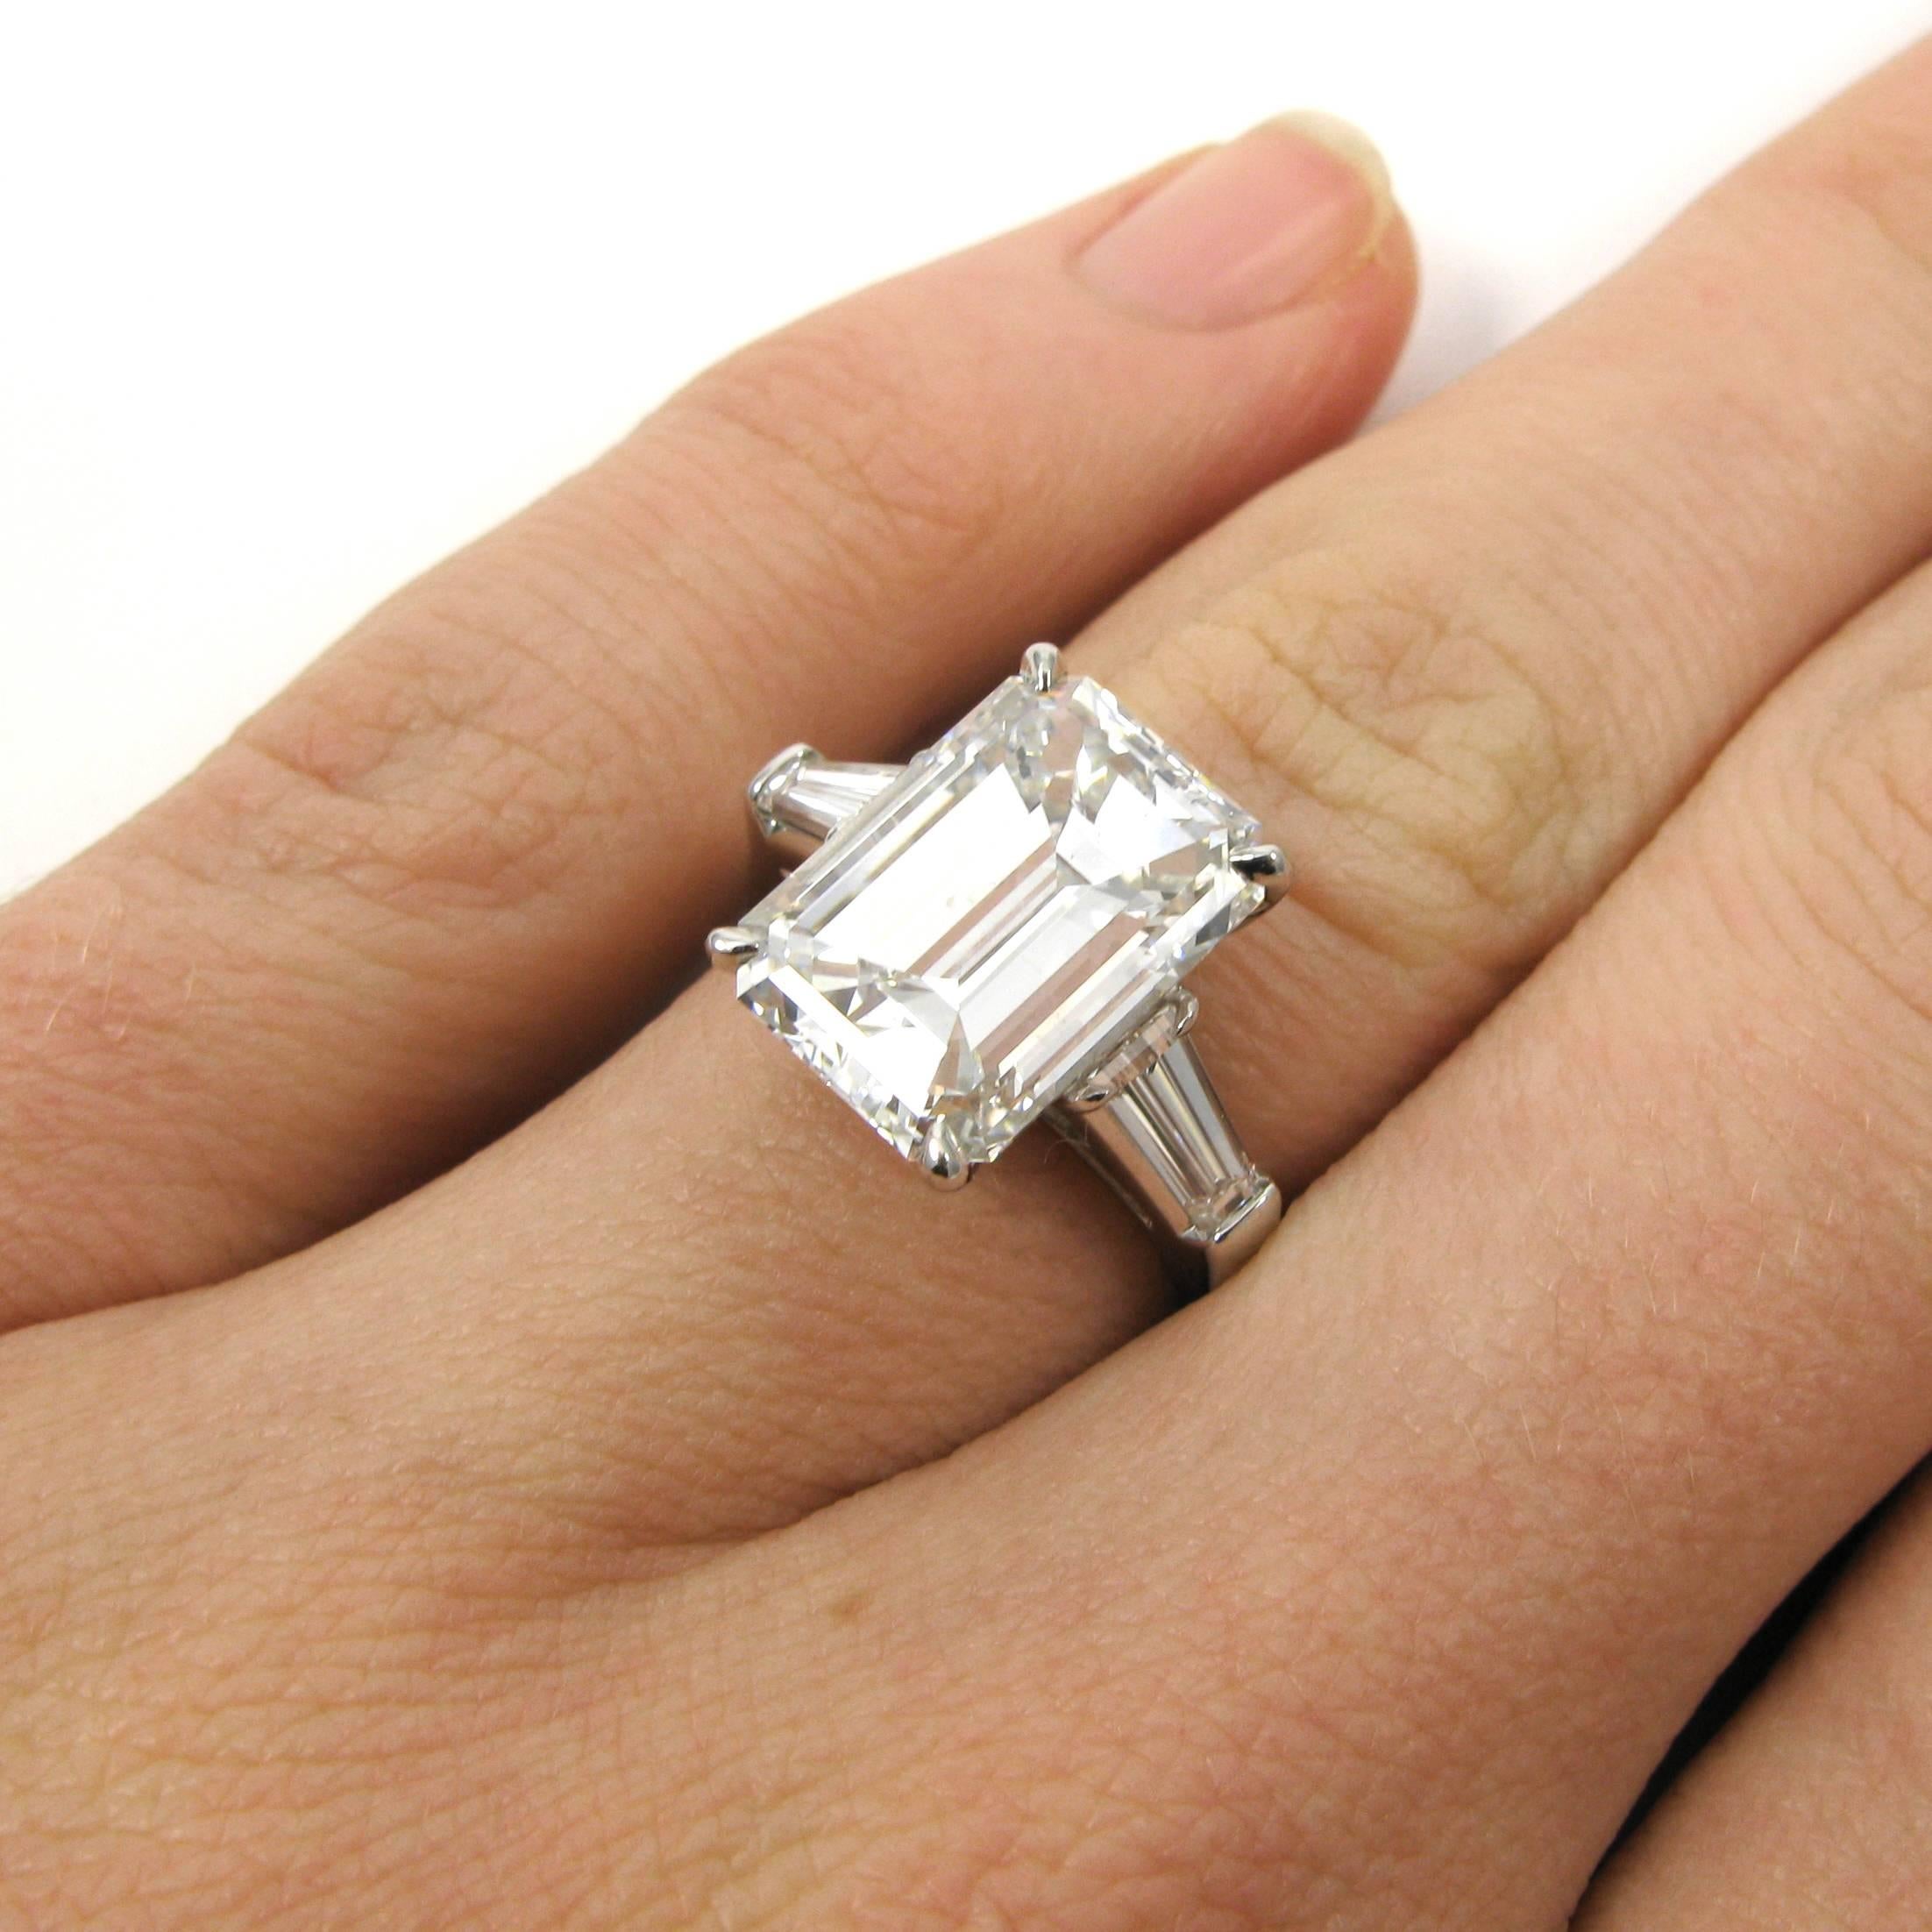 A beautifully cut 5.81 carat emerald-cut diamond with E color and SI1 clarity is set a classic J. Birnbach platinum mounting accented by two tapered baguette-cut diamonds totaling approx. 0.80 carat. 

Purchase includes GIA Diamond Grading Report